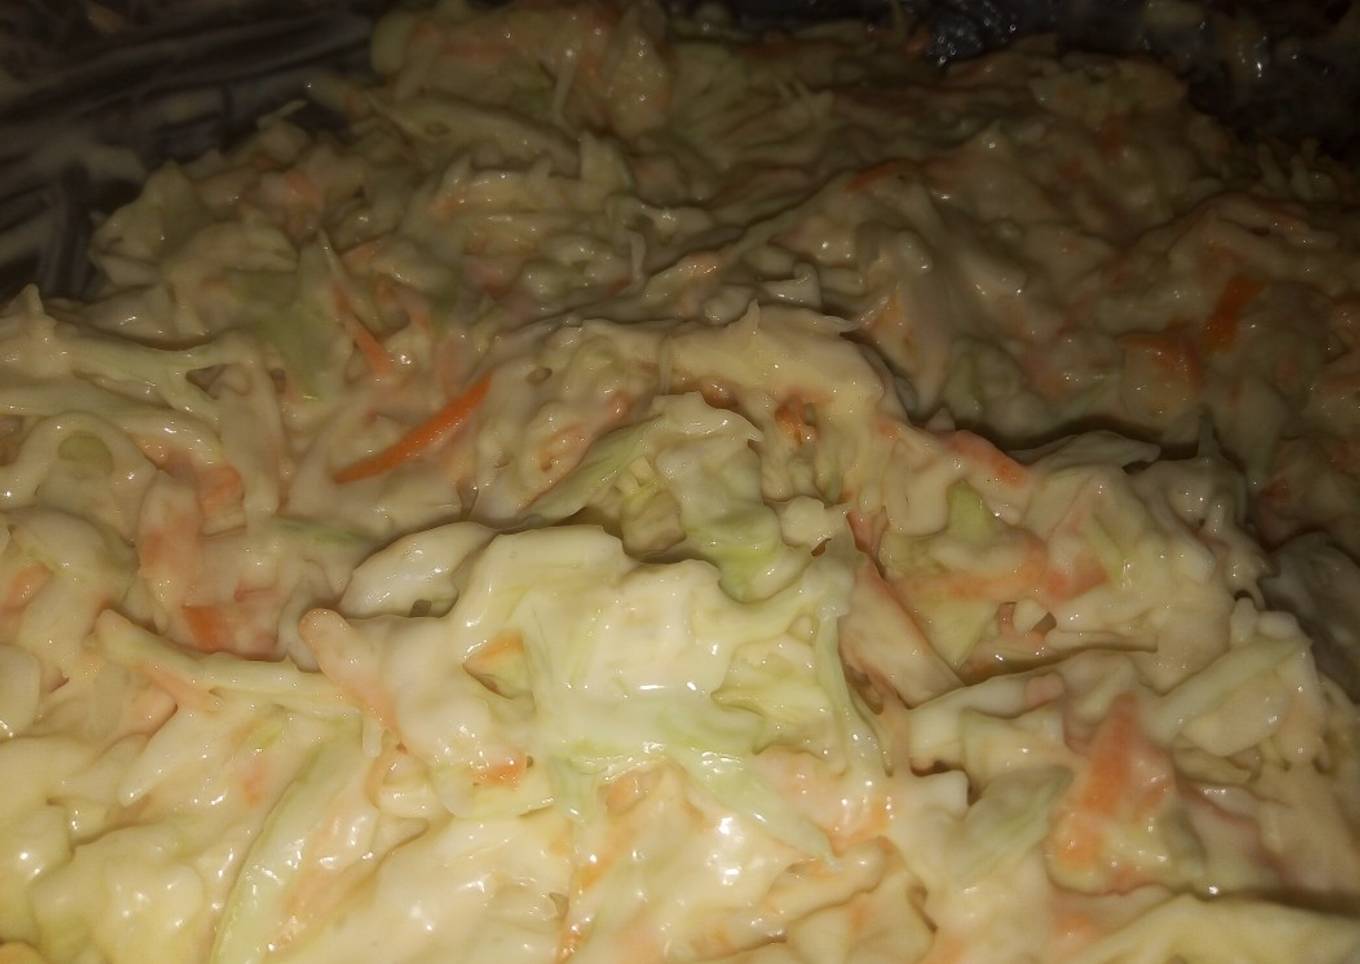 Coleslaw Salad in Mayonnaise